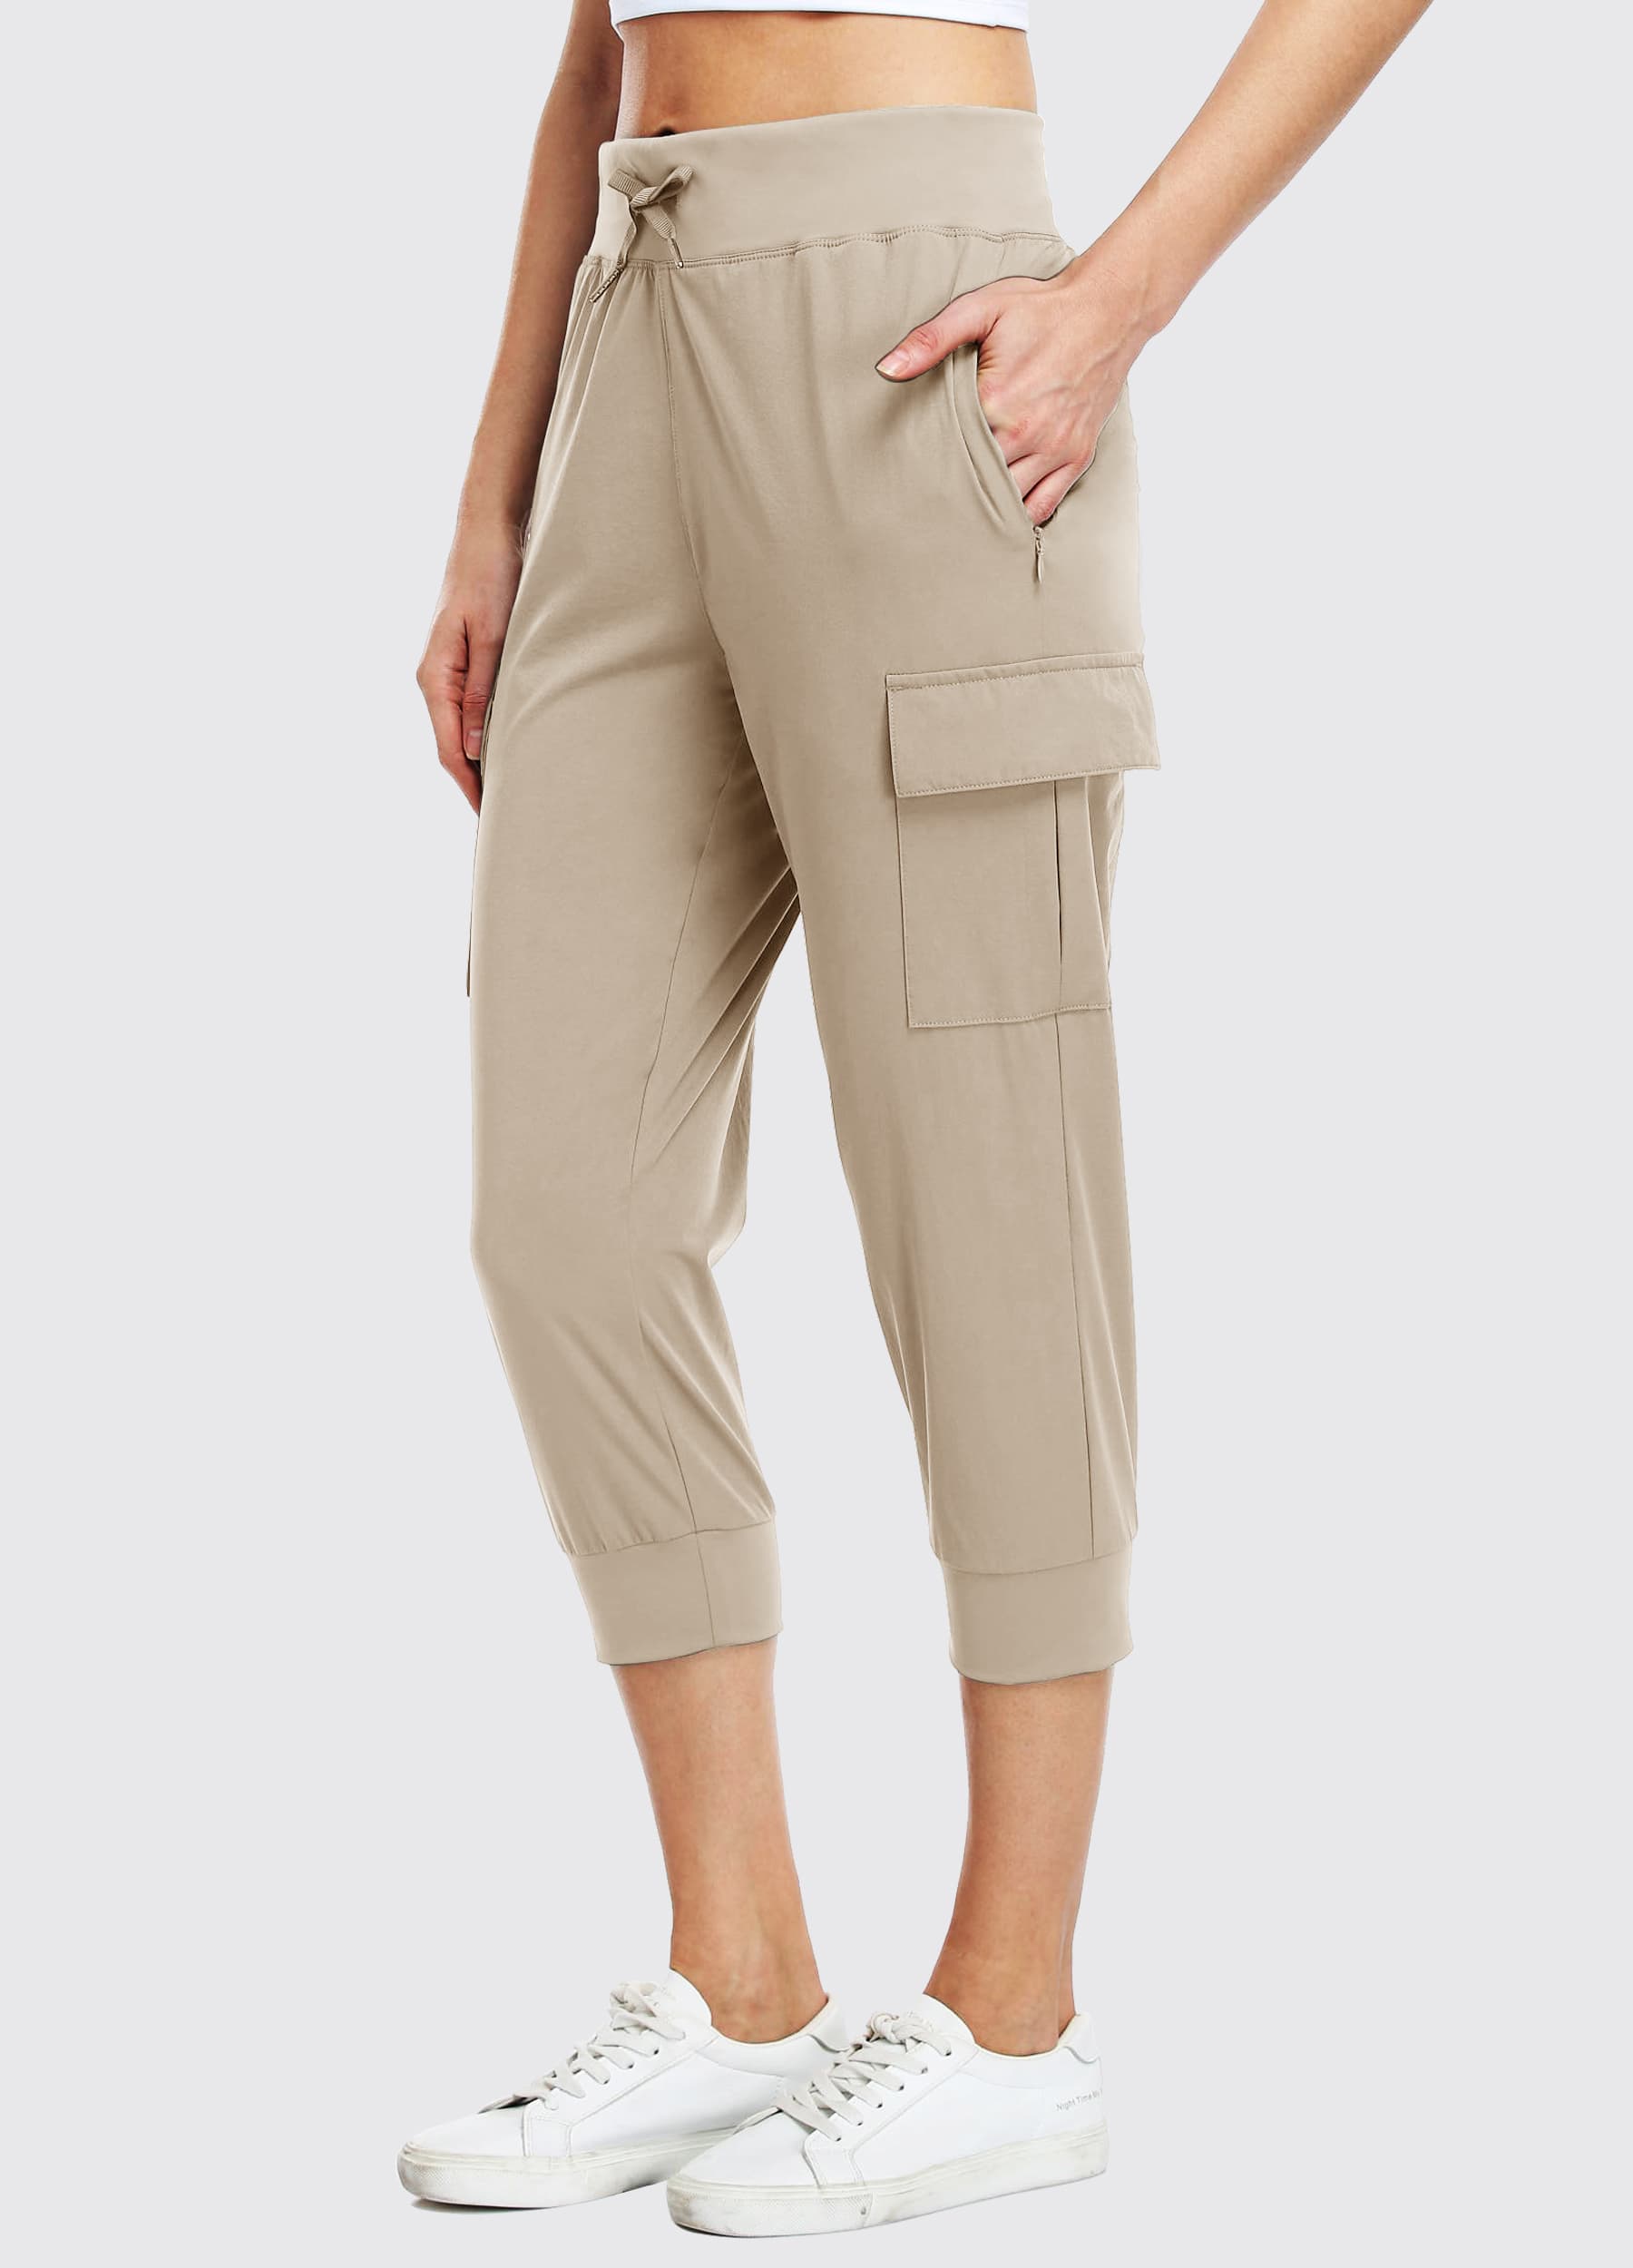 Women's Drawstring Cargo Pants pop fit Capris for Women Conceited